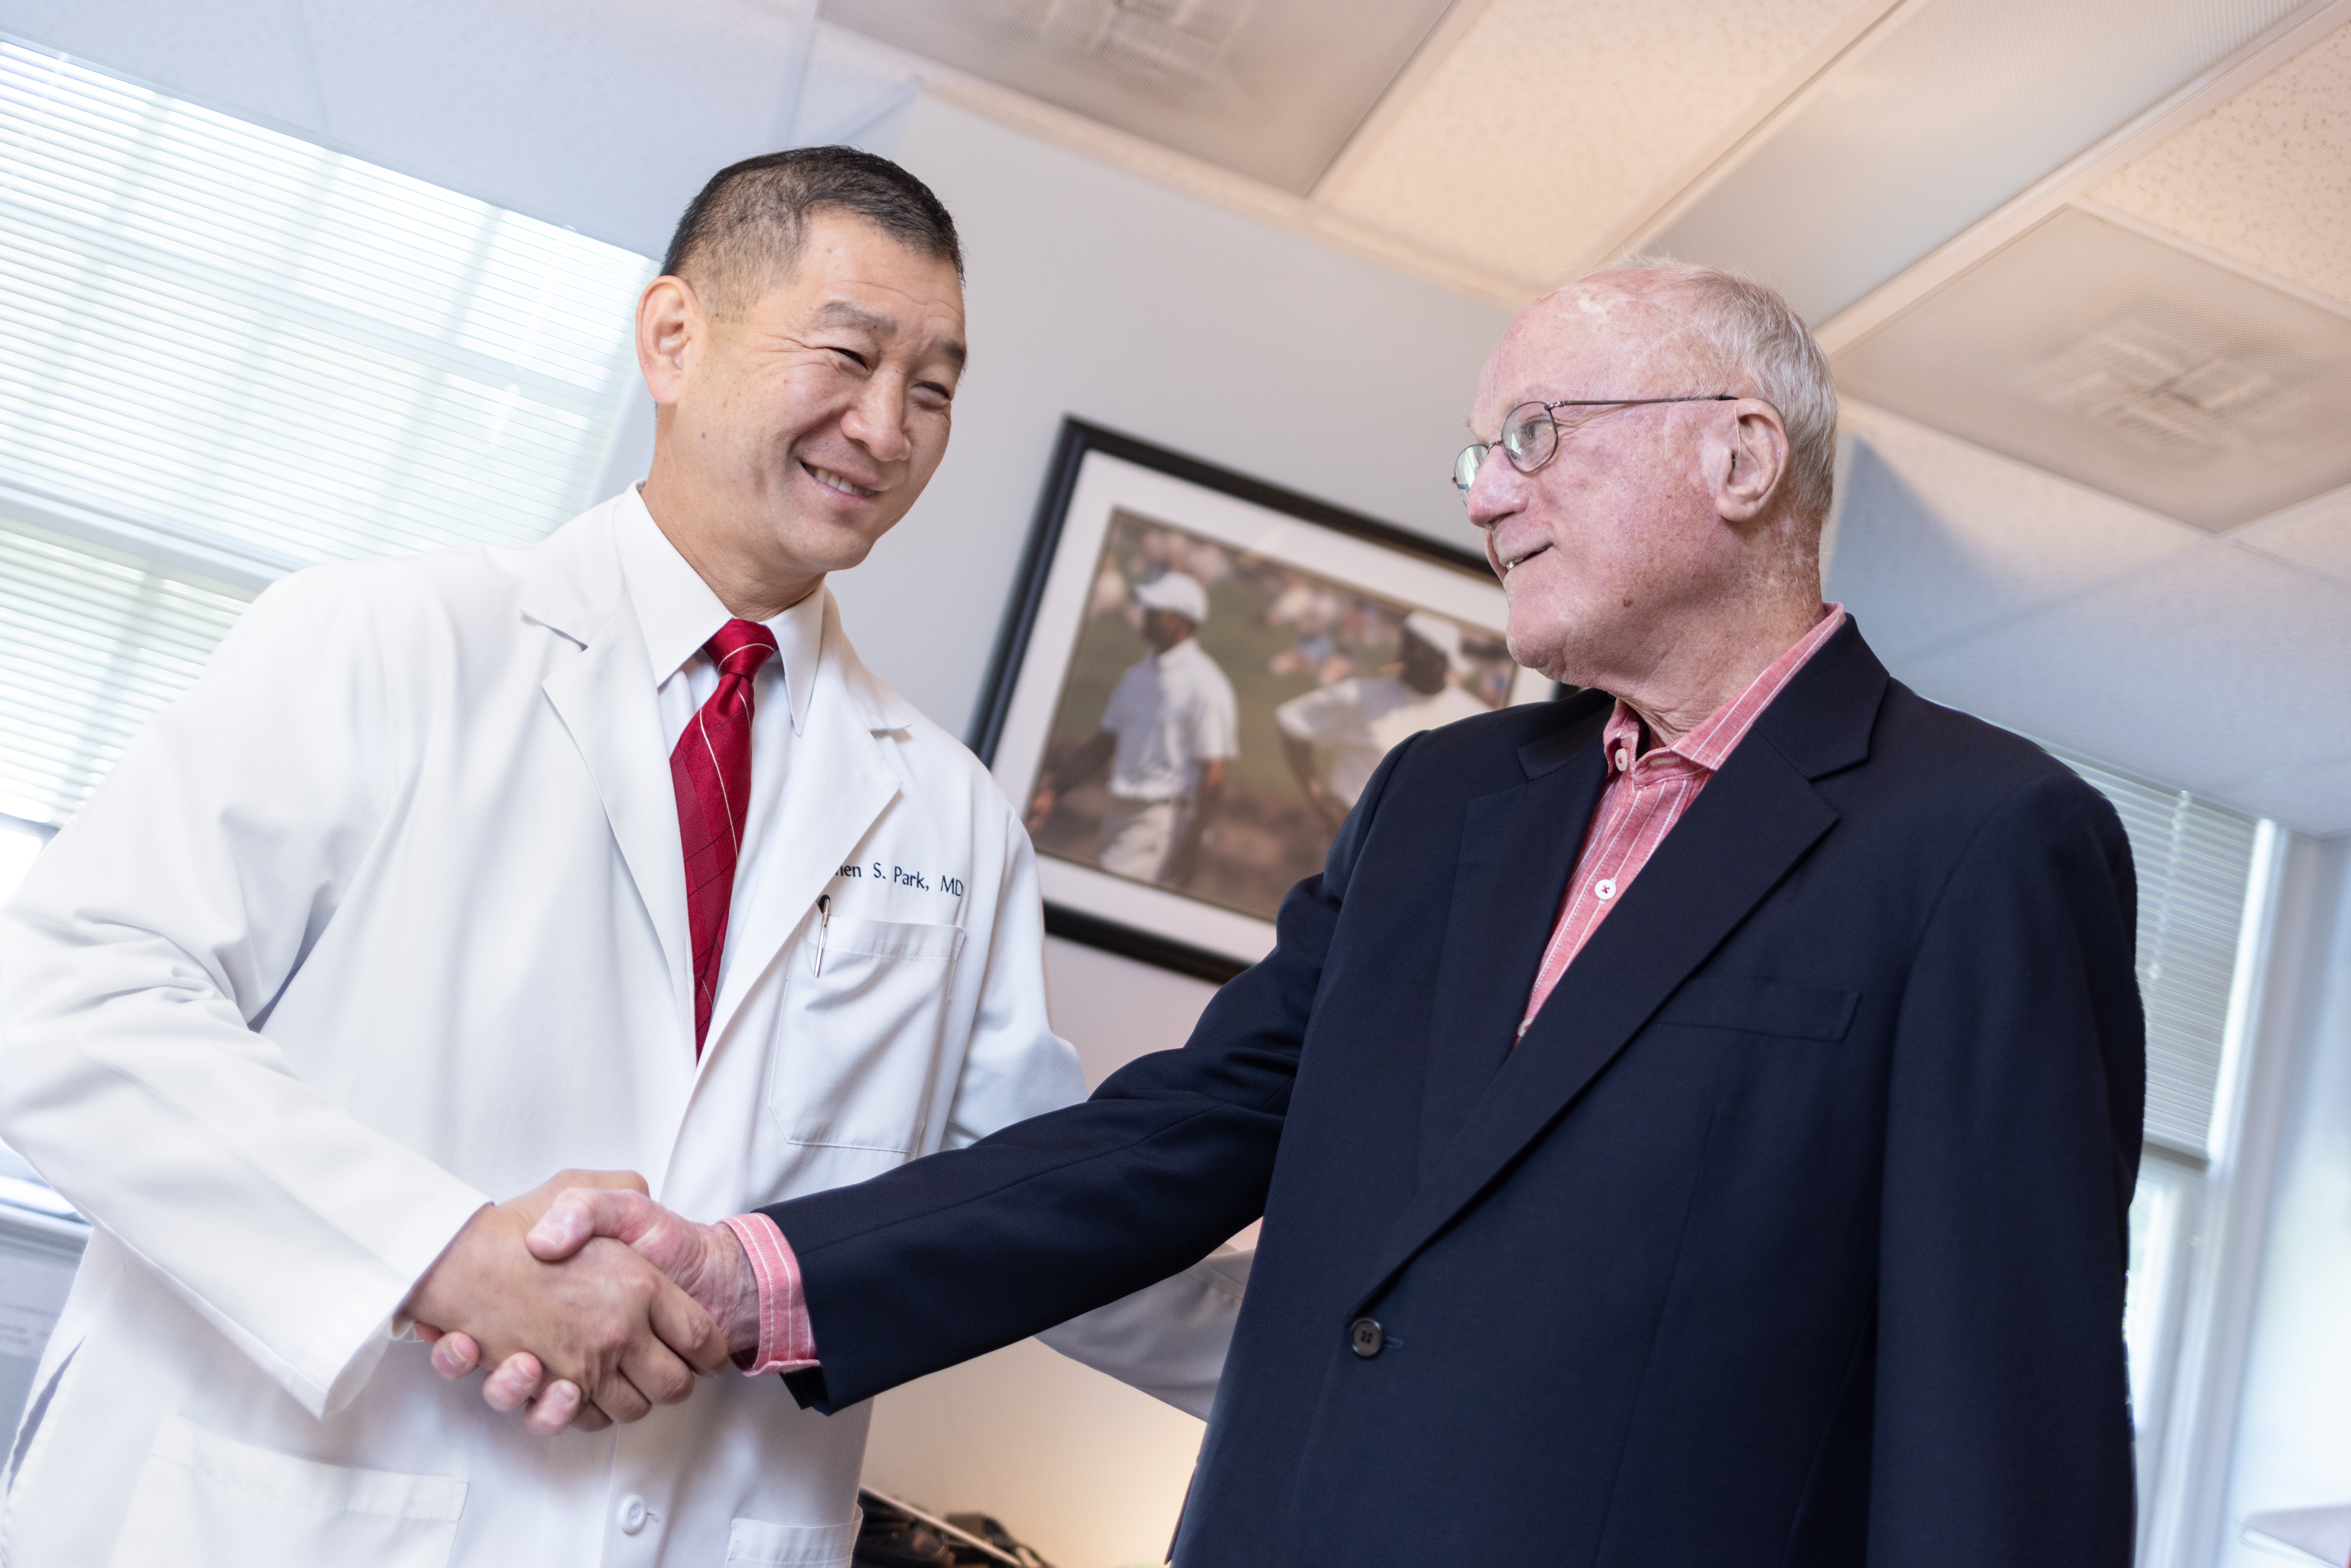 Dr. Park and Jack Reid stand in an office shaking hands